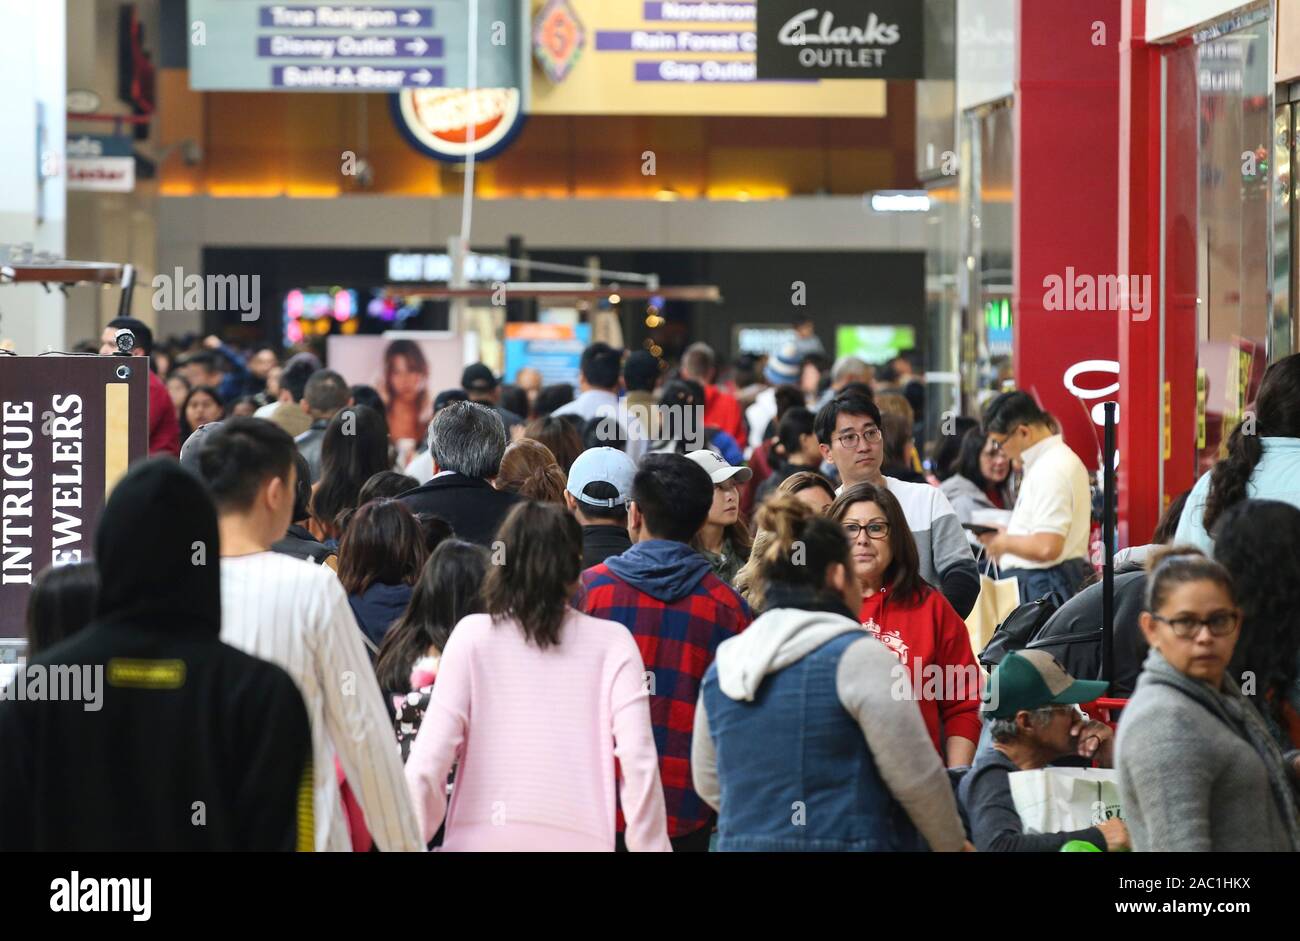 Ontario, USA. 29th Nov, 2019. People do shopping for Black Friday sales at  an outlet in Ontario, California, the United States, Nov. 29, 2019. Credit:  Li Ying/Xinhua/Alamy Live News Stock Photo - Alamy